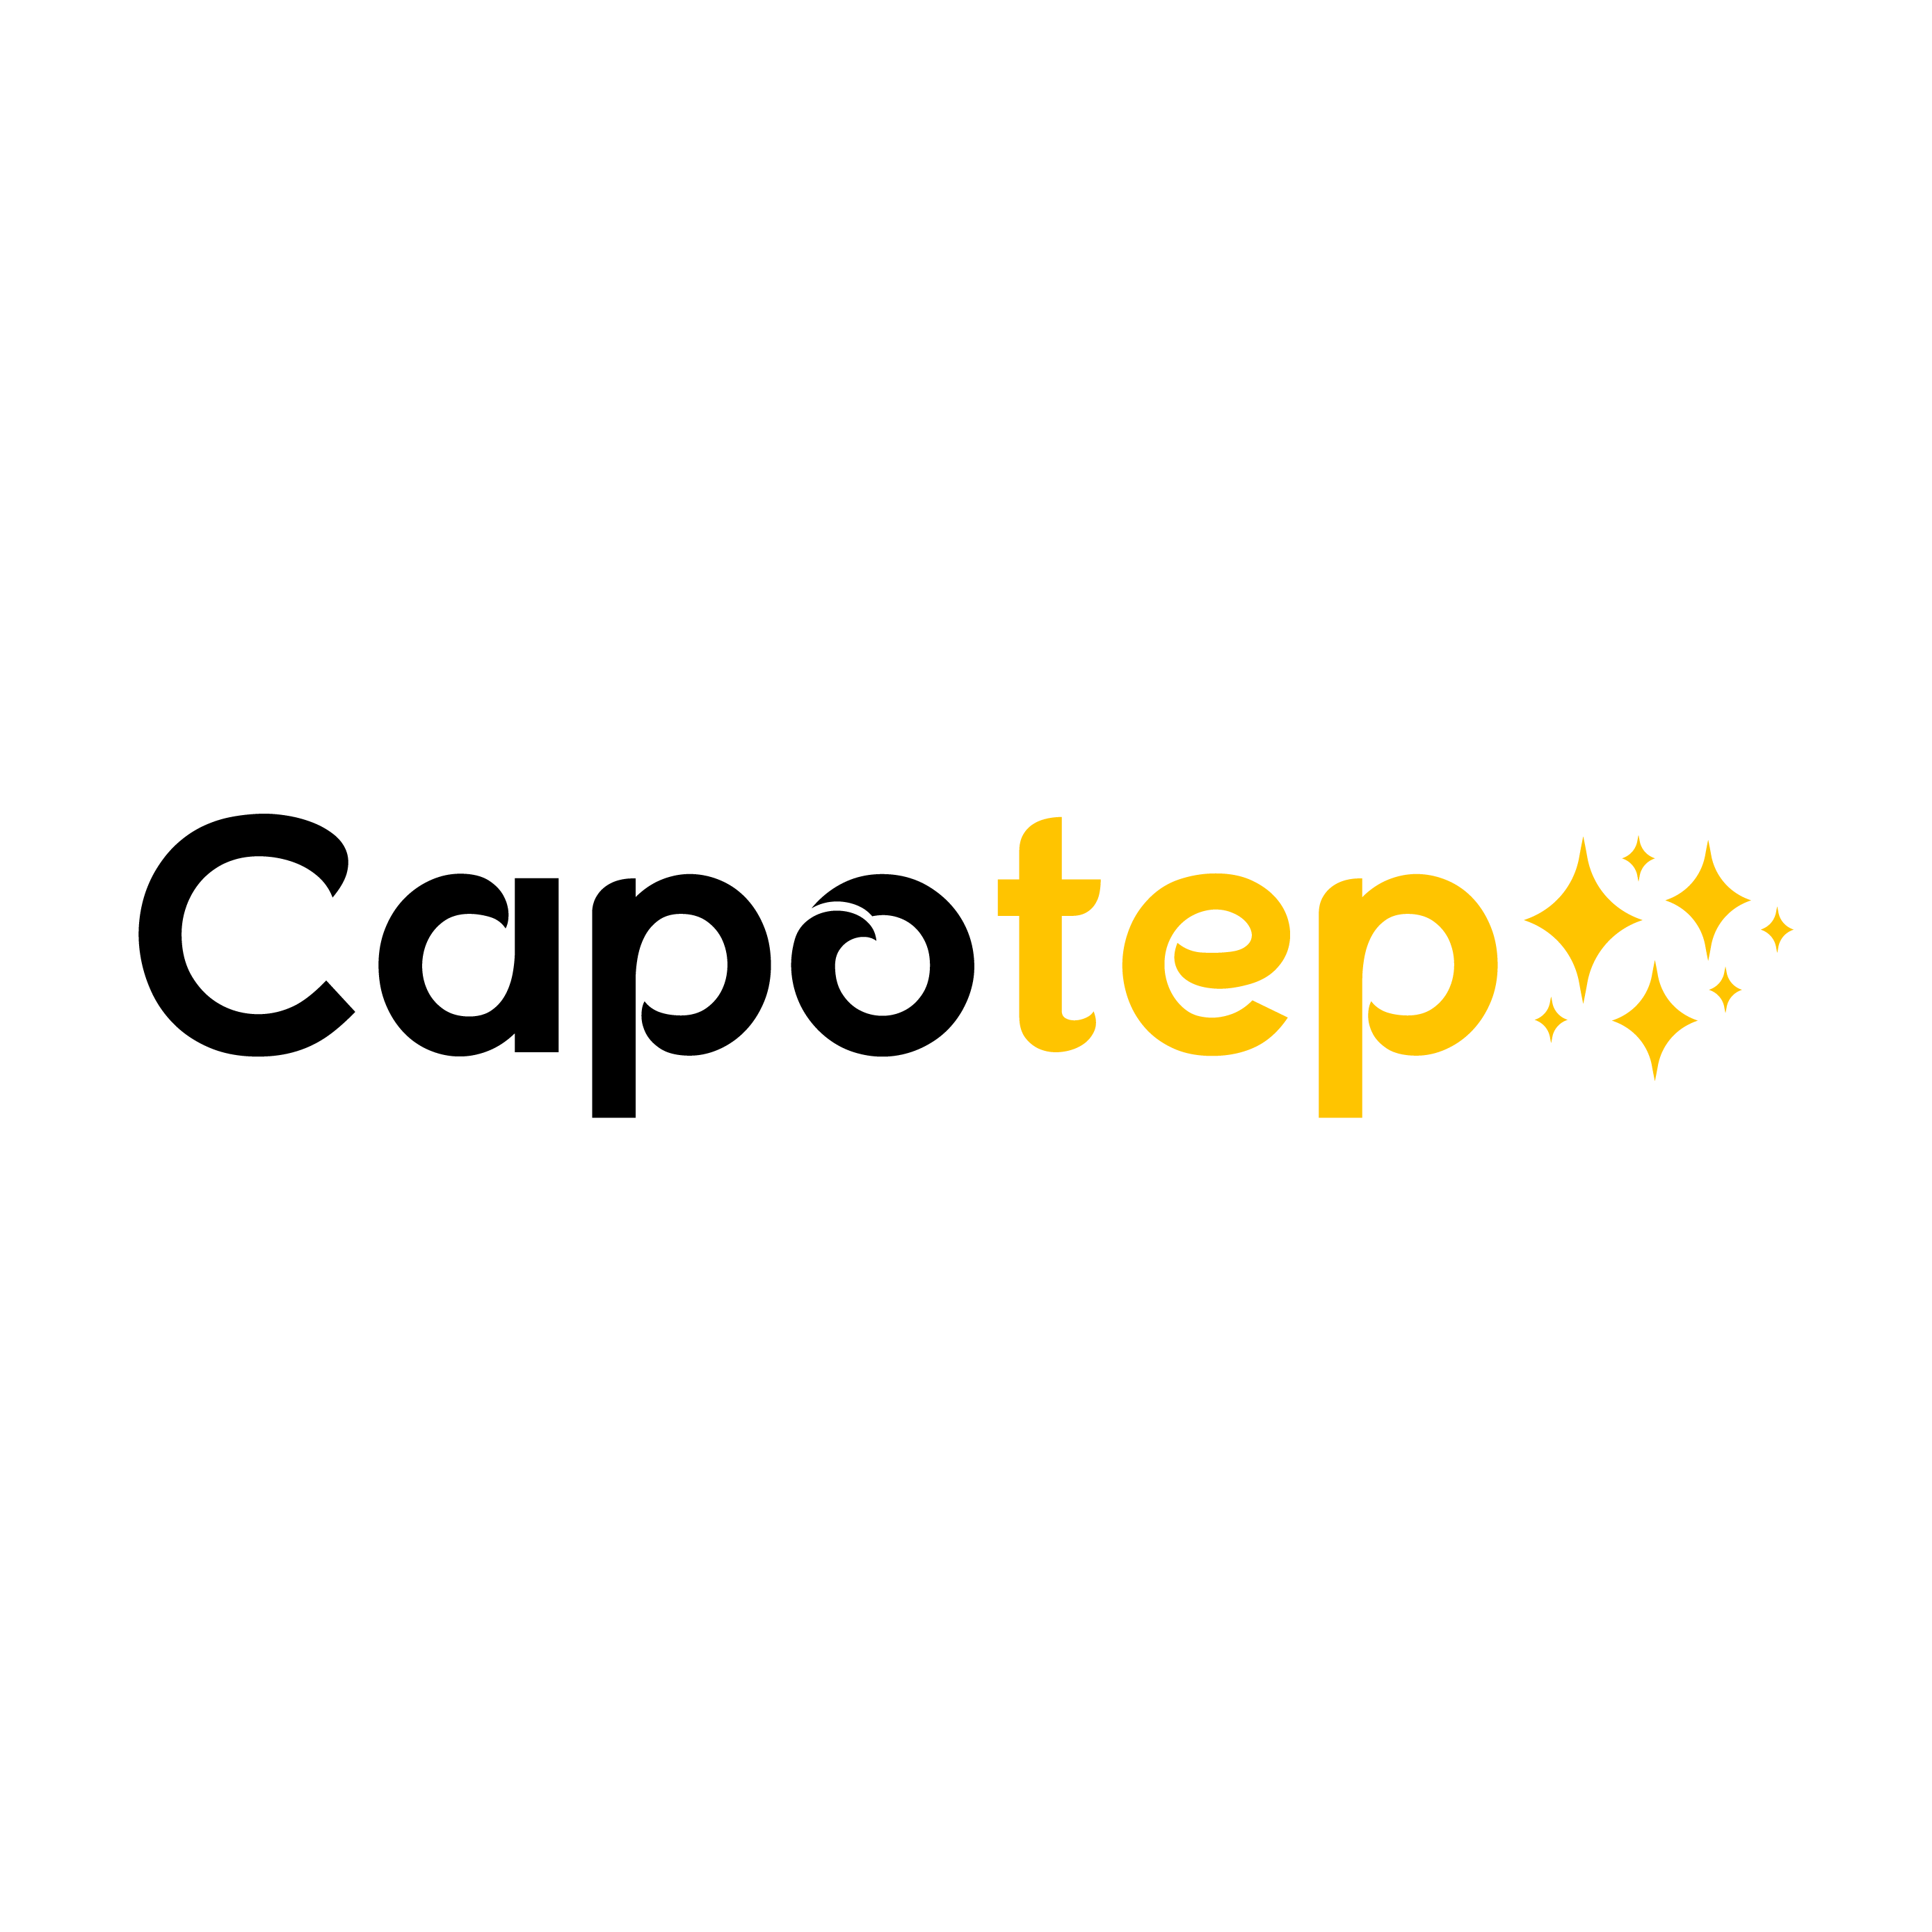 Capotep